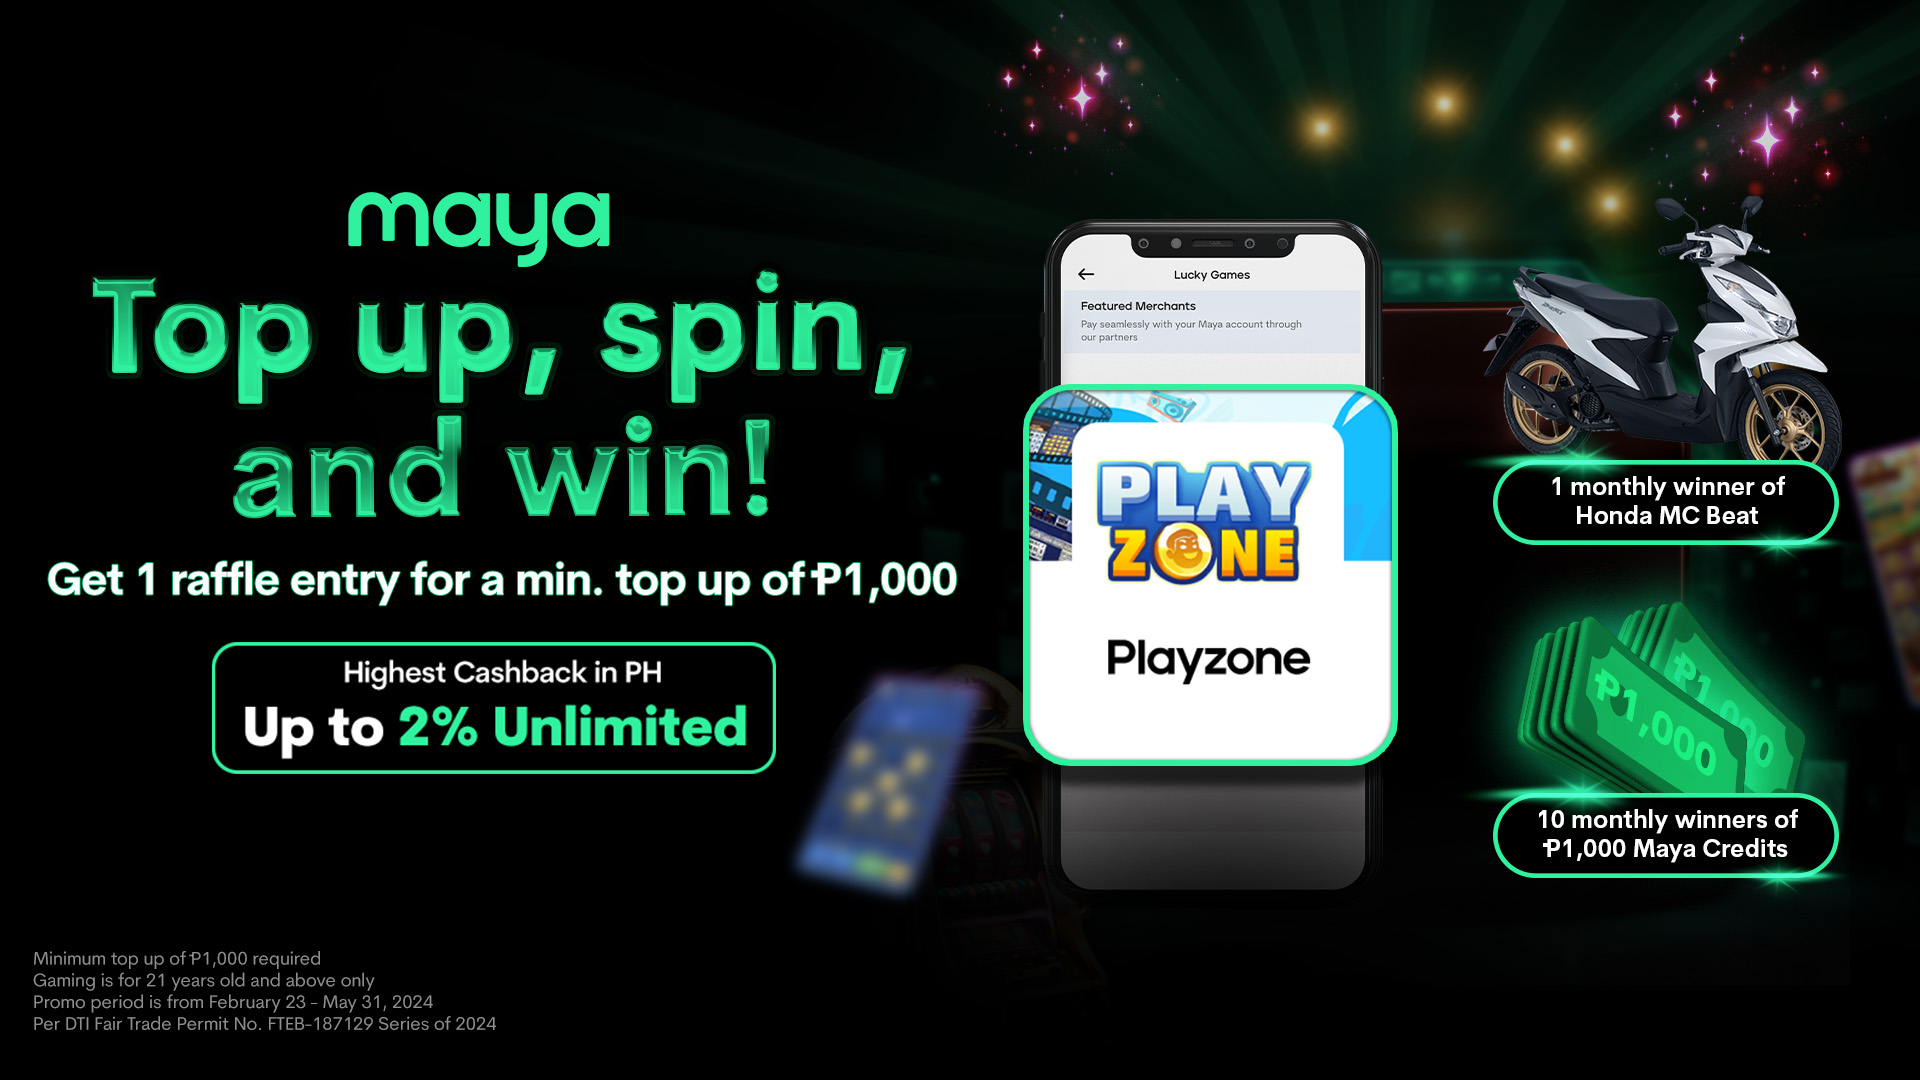 Top up your Playzone wallet with Maya for a minimum of P1,000 and get one raffle entry